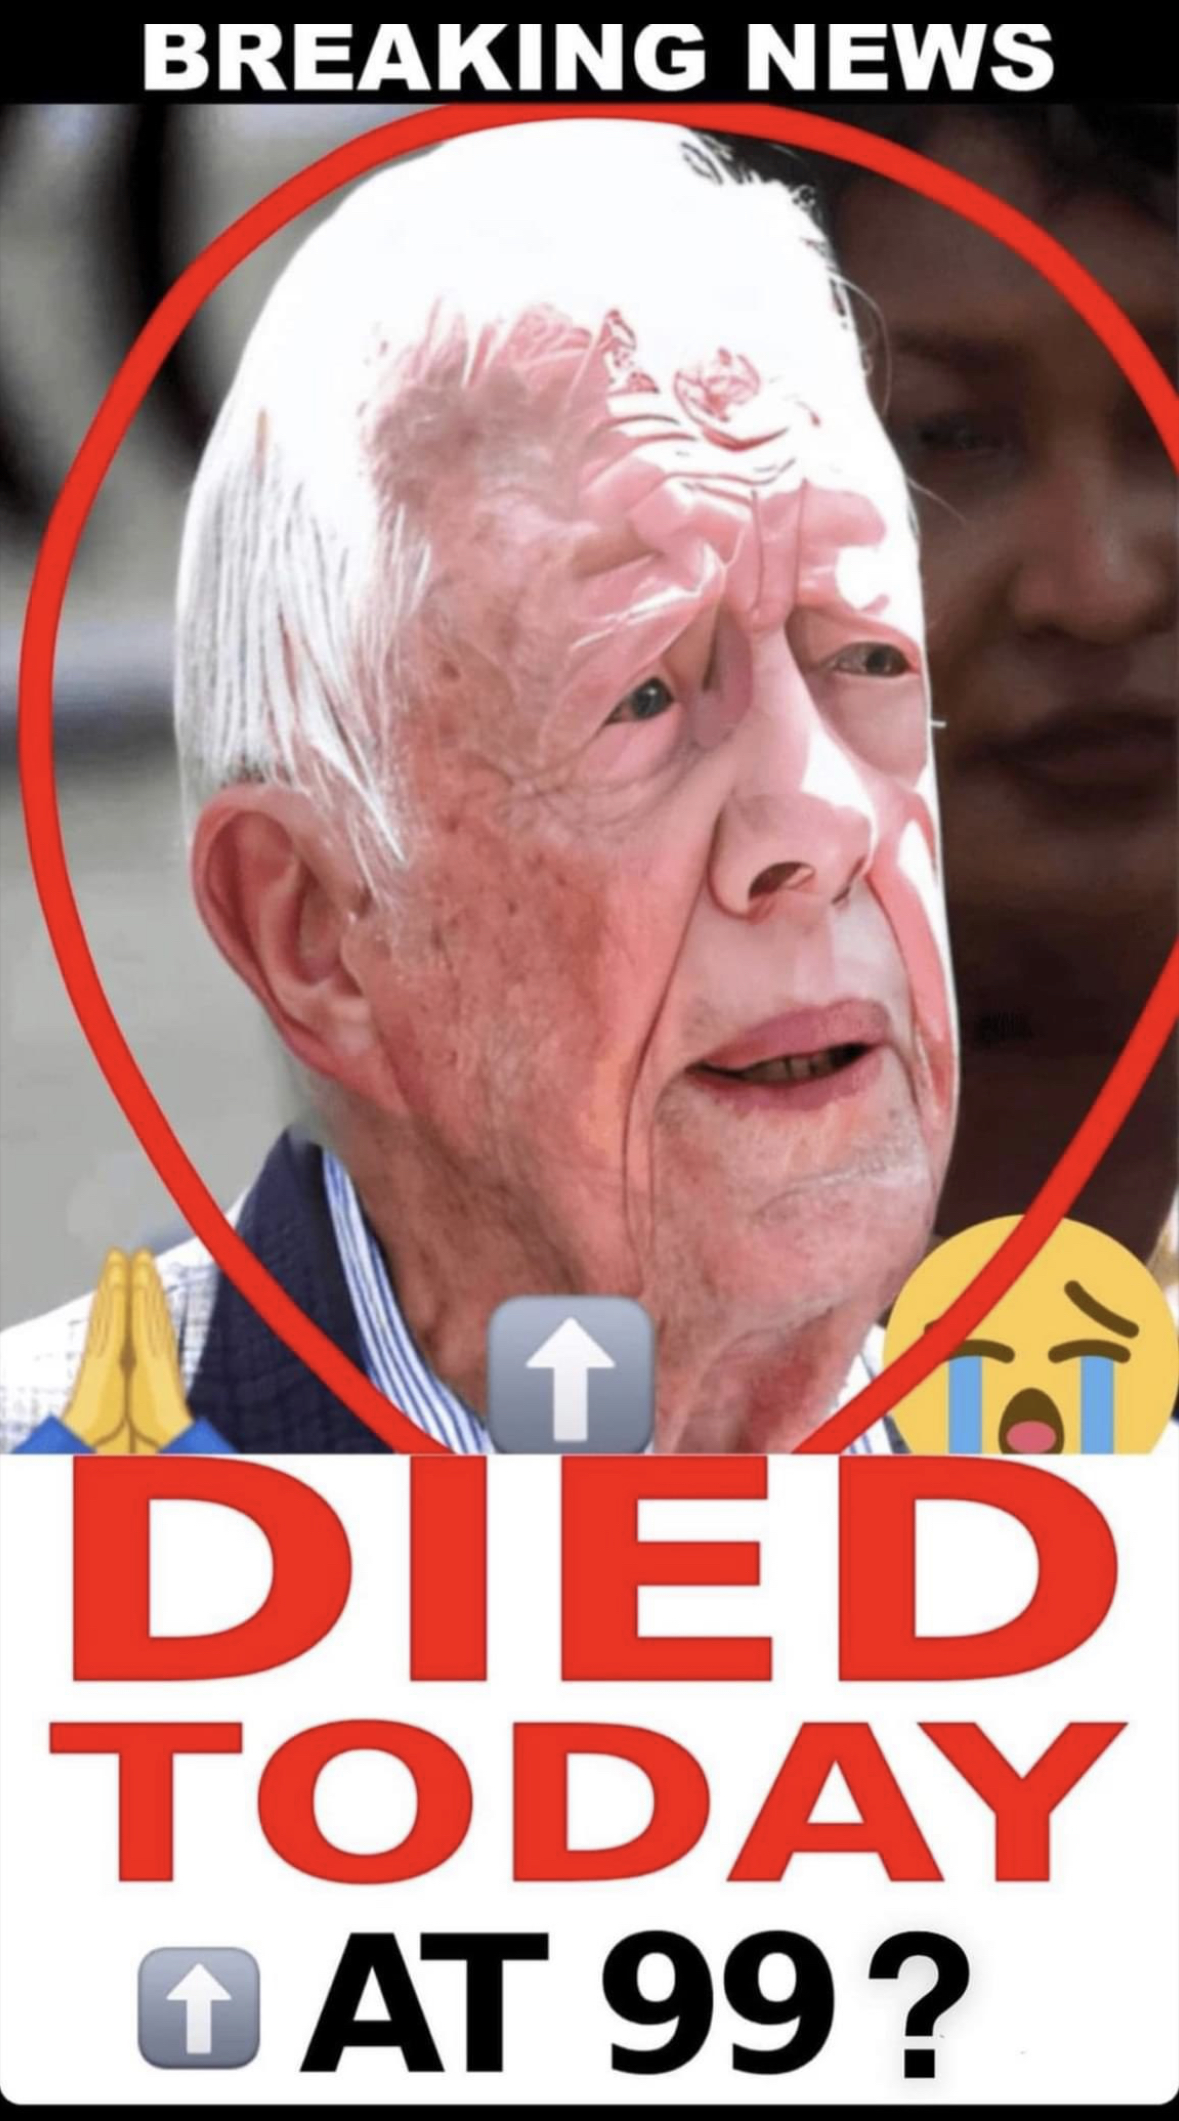 THE SAD NEWS ABOUT JIMMY CARTER, FORMER US PRESIDENT.